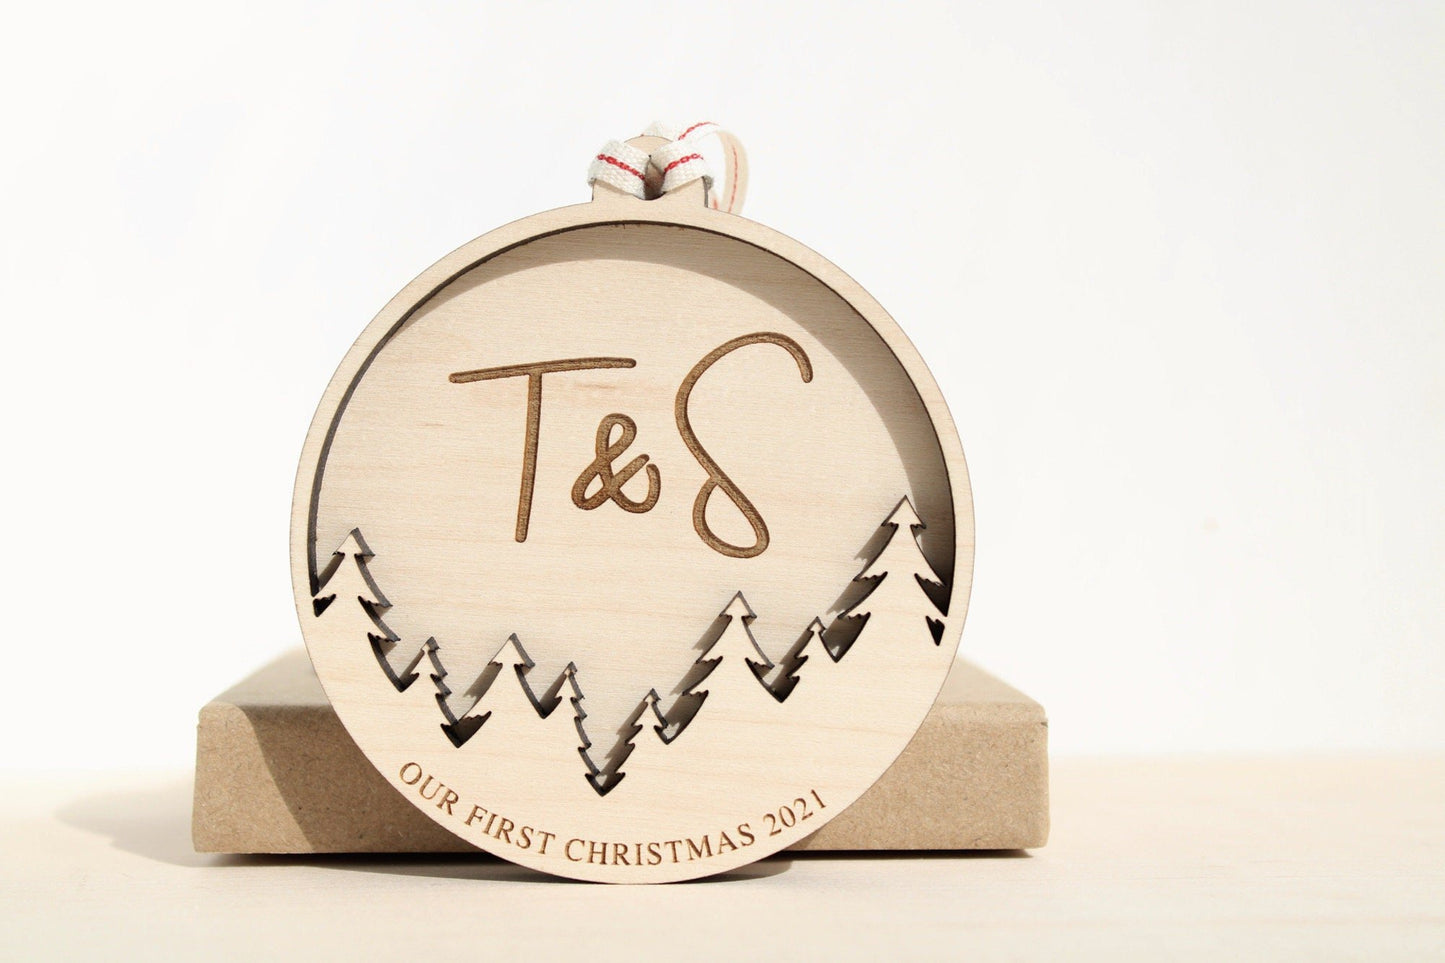 Our First Christmas wooden ornament